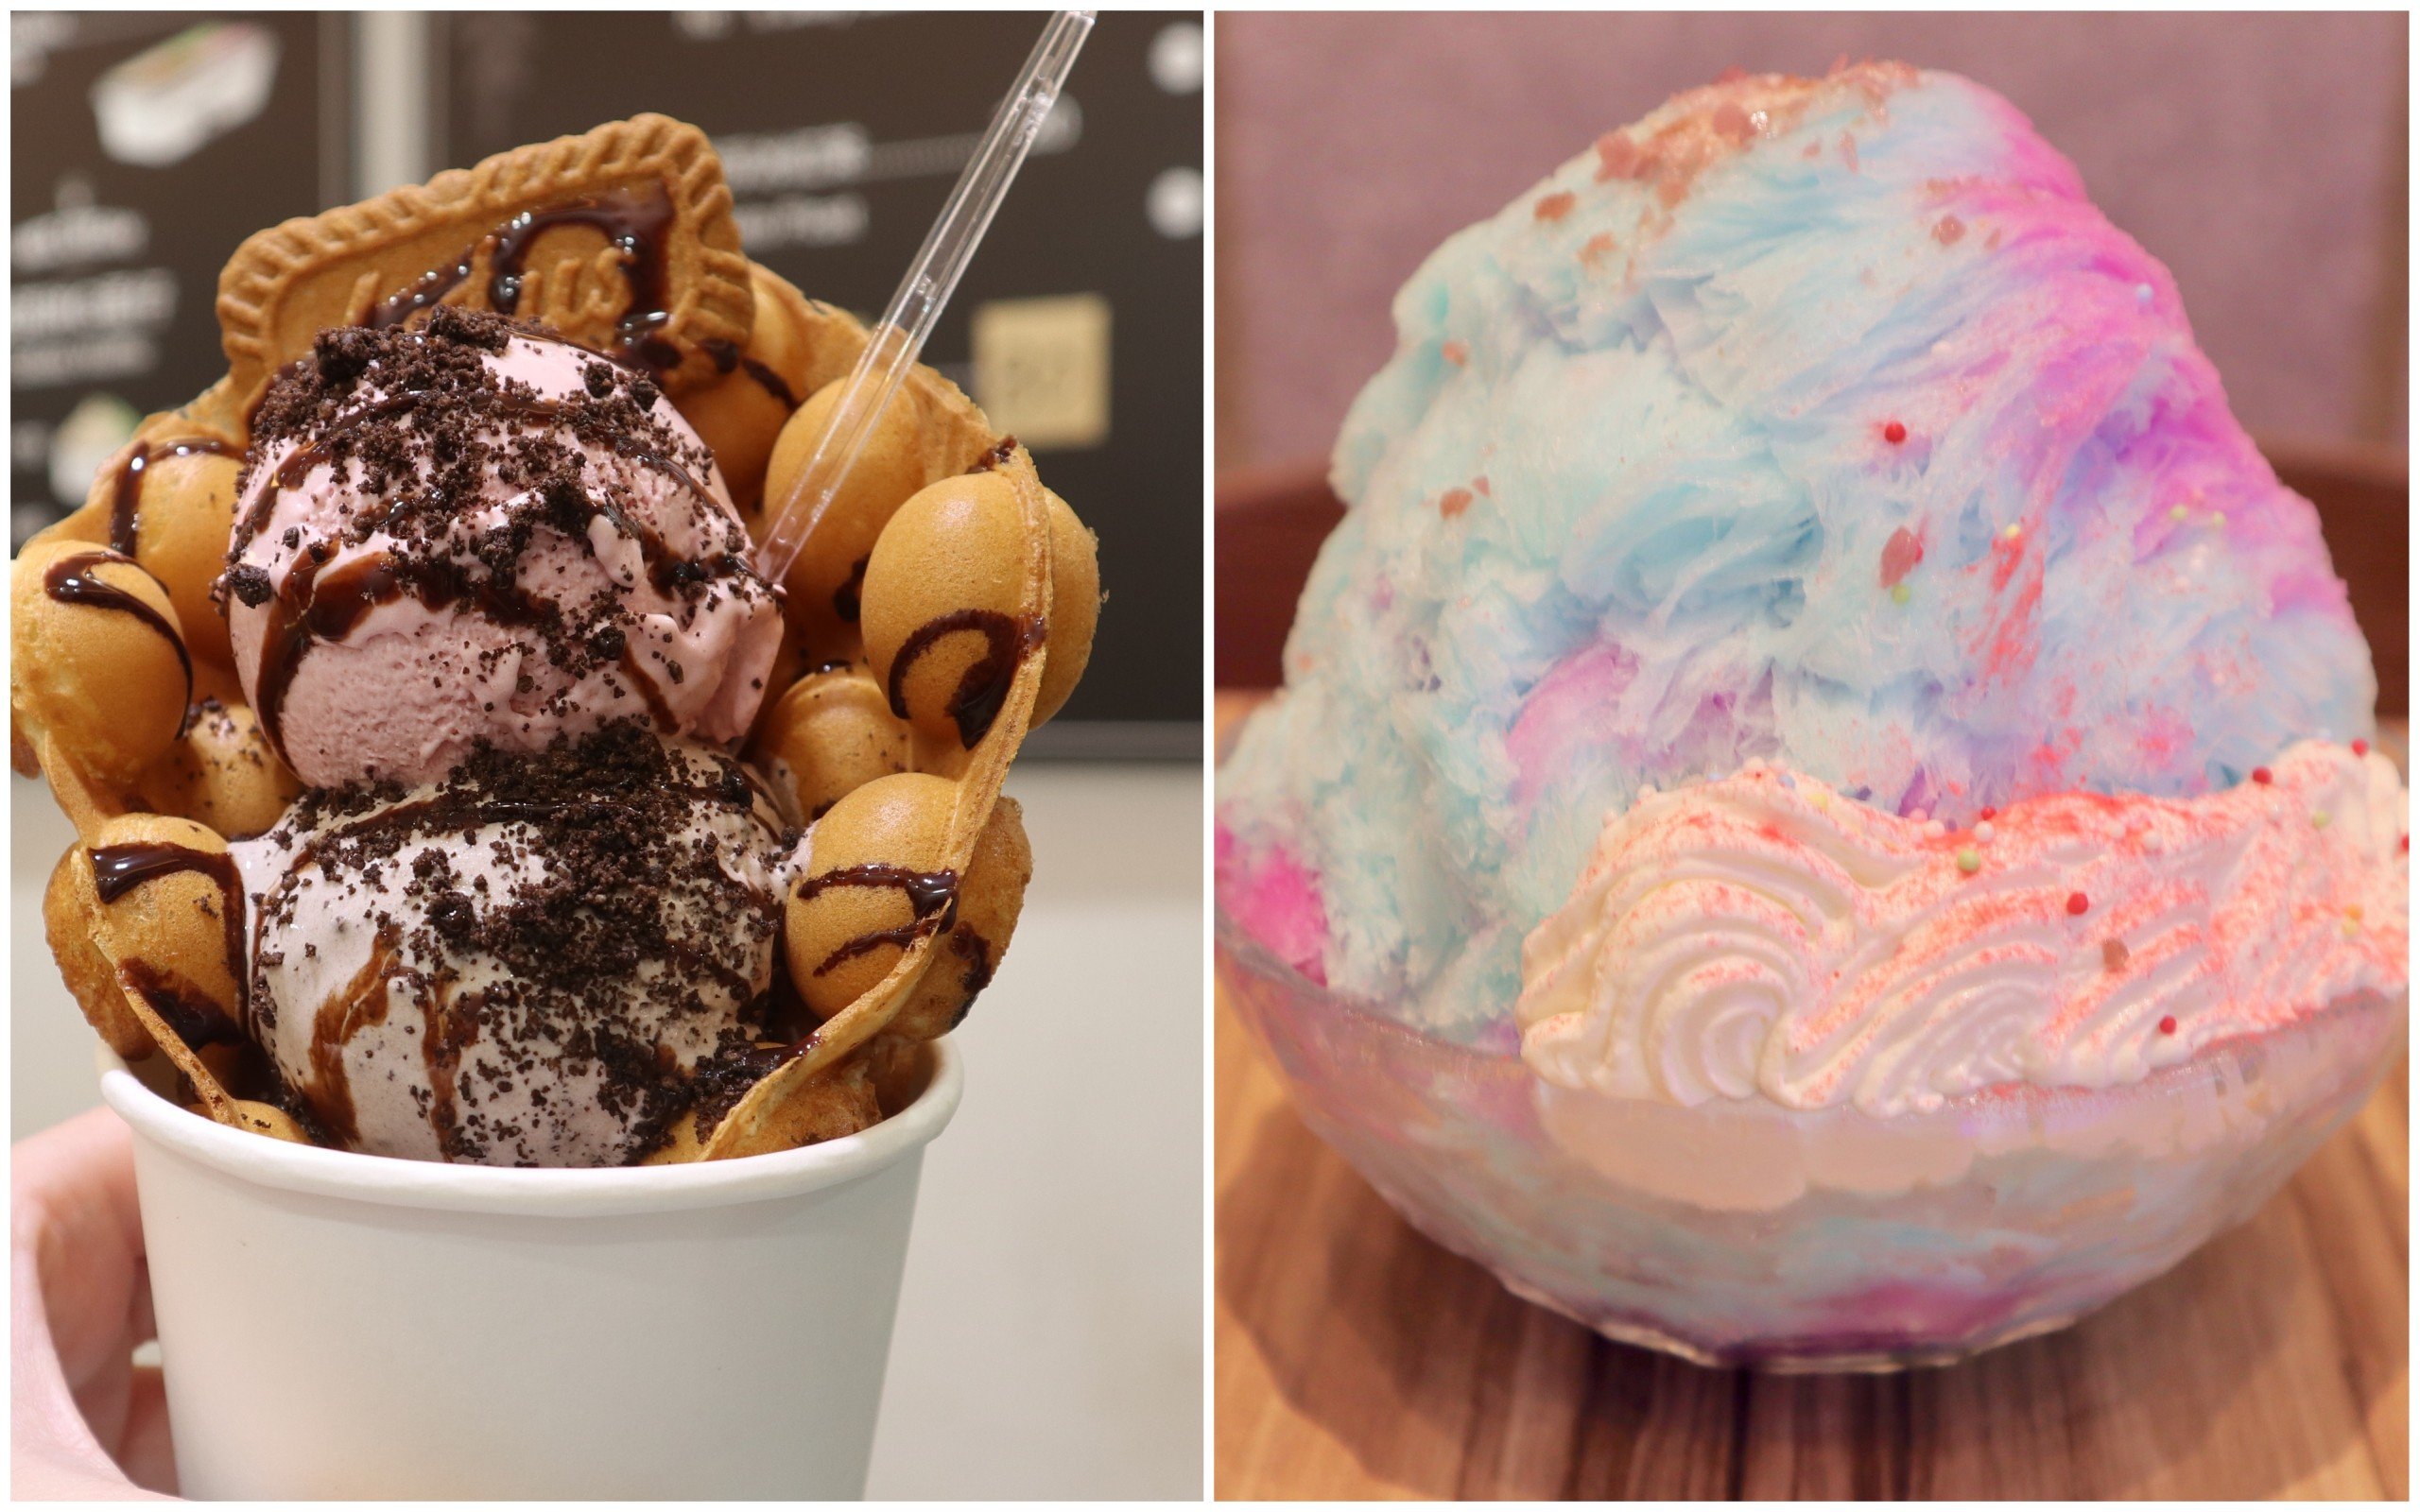 Craving some vegan desserts? You can now enjoy a gelato waffle from Nice Cream and unicorn sensation from Ice Monster, or our pick of other vegan dessert places in Taiwan. Photos: Handouts